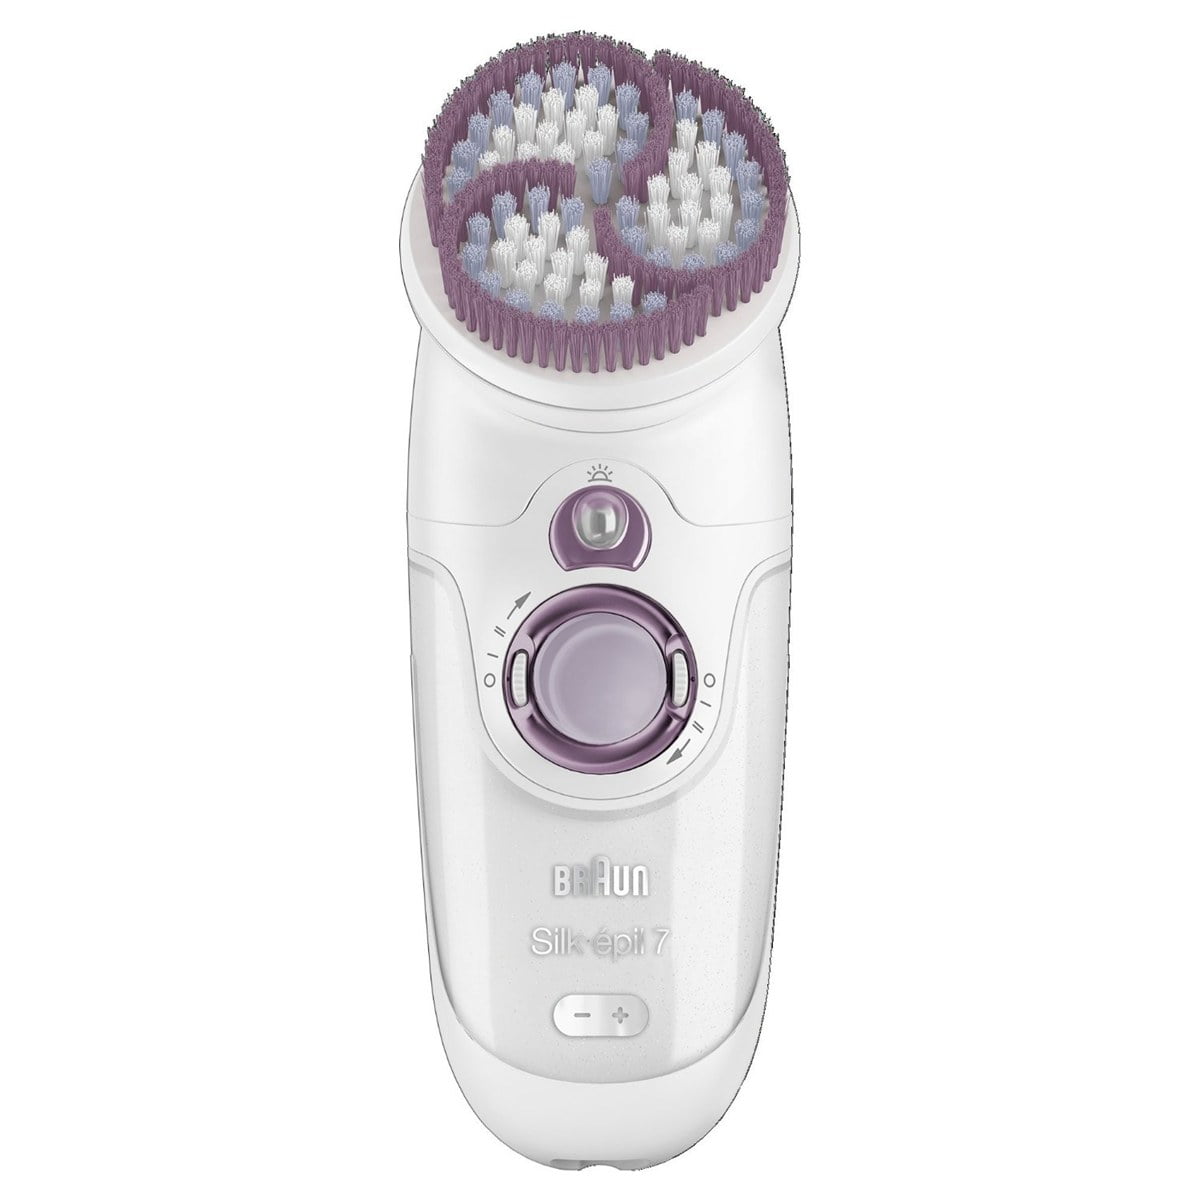 Braun Silk Epil 7 Skin Spa SE7951 Epilator Review Specifications and Online Price in India